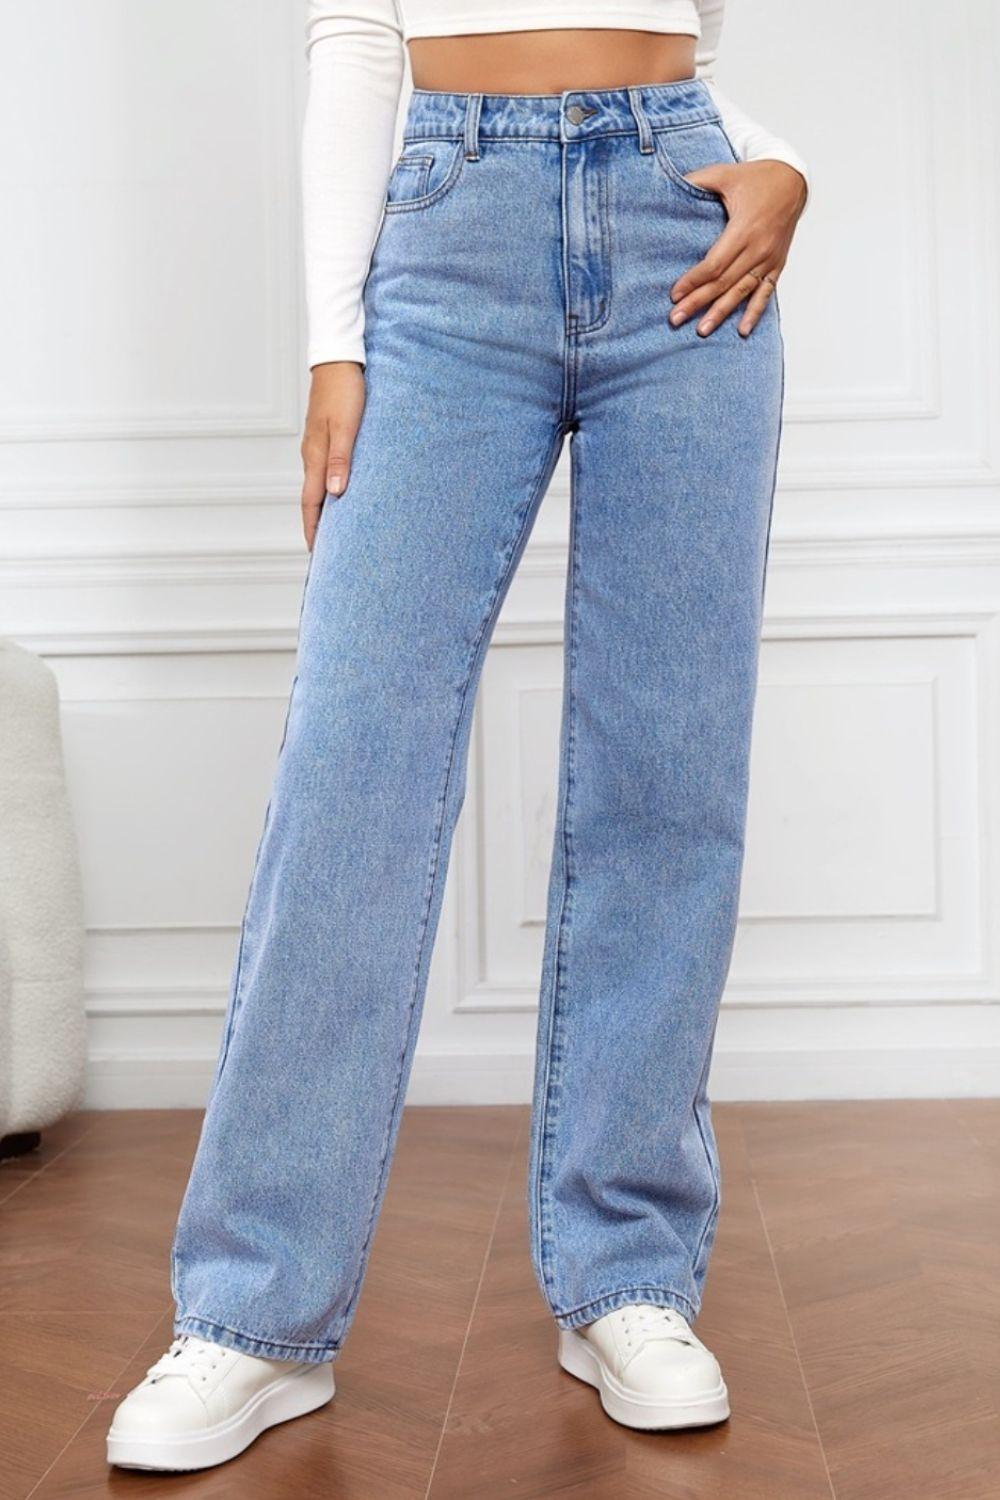 a woman standing on a wooden floor wearing a pair of jeans